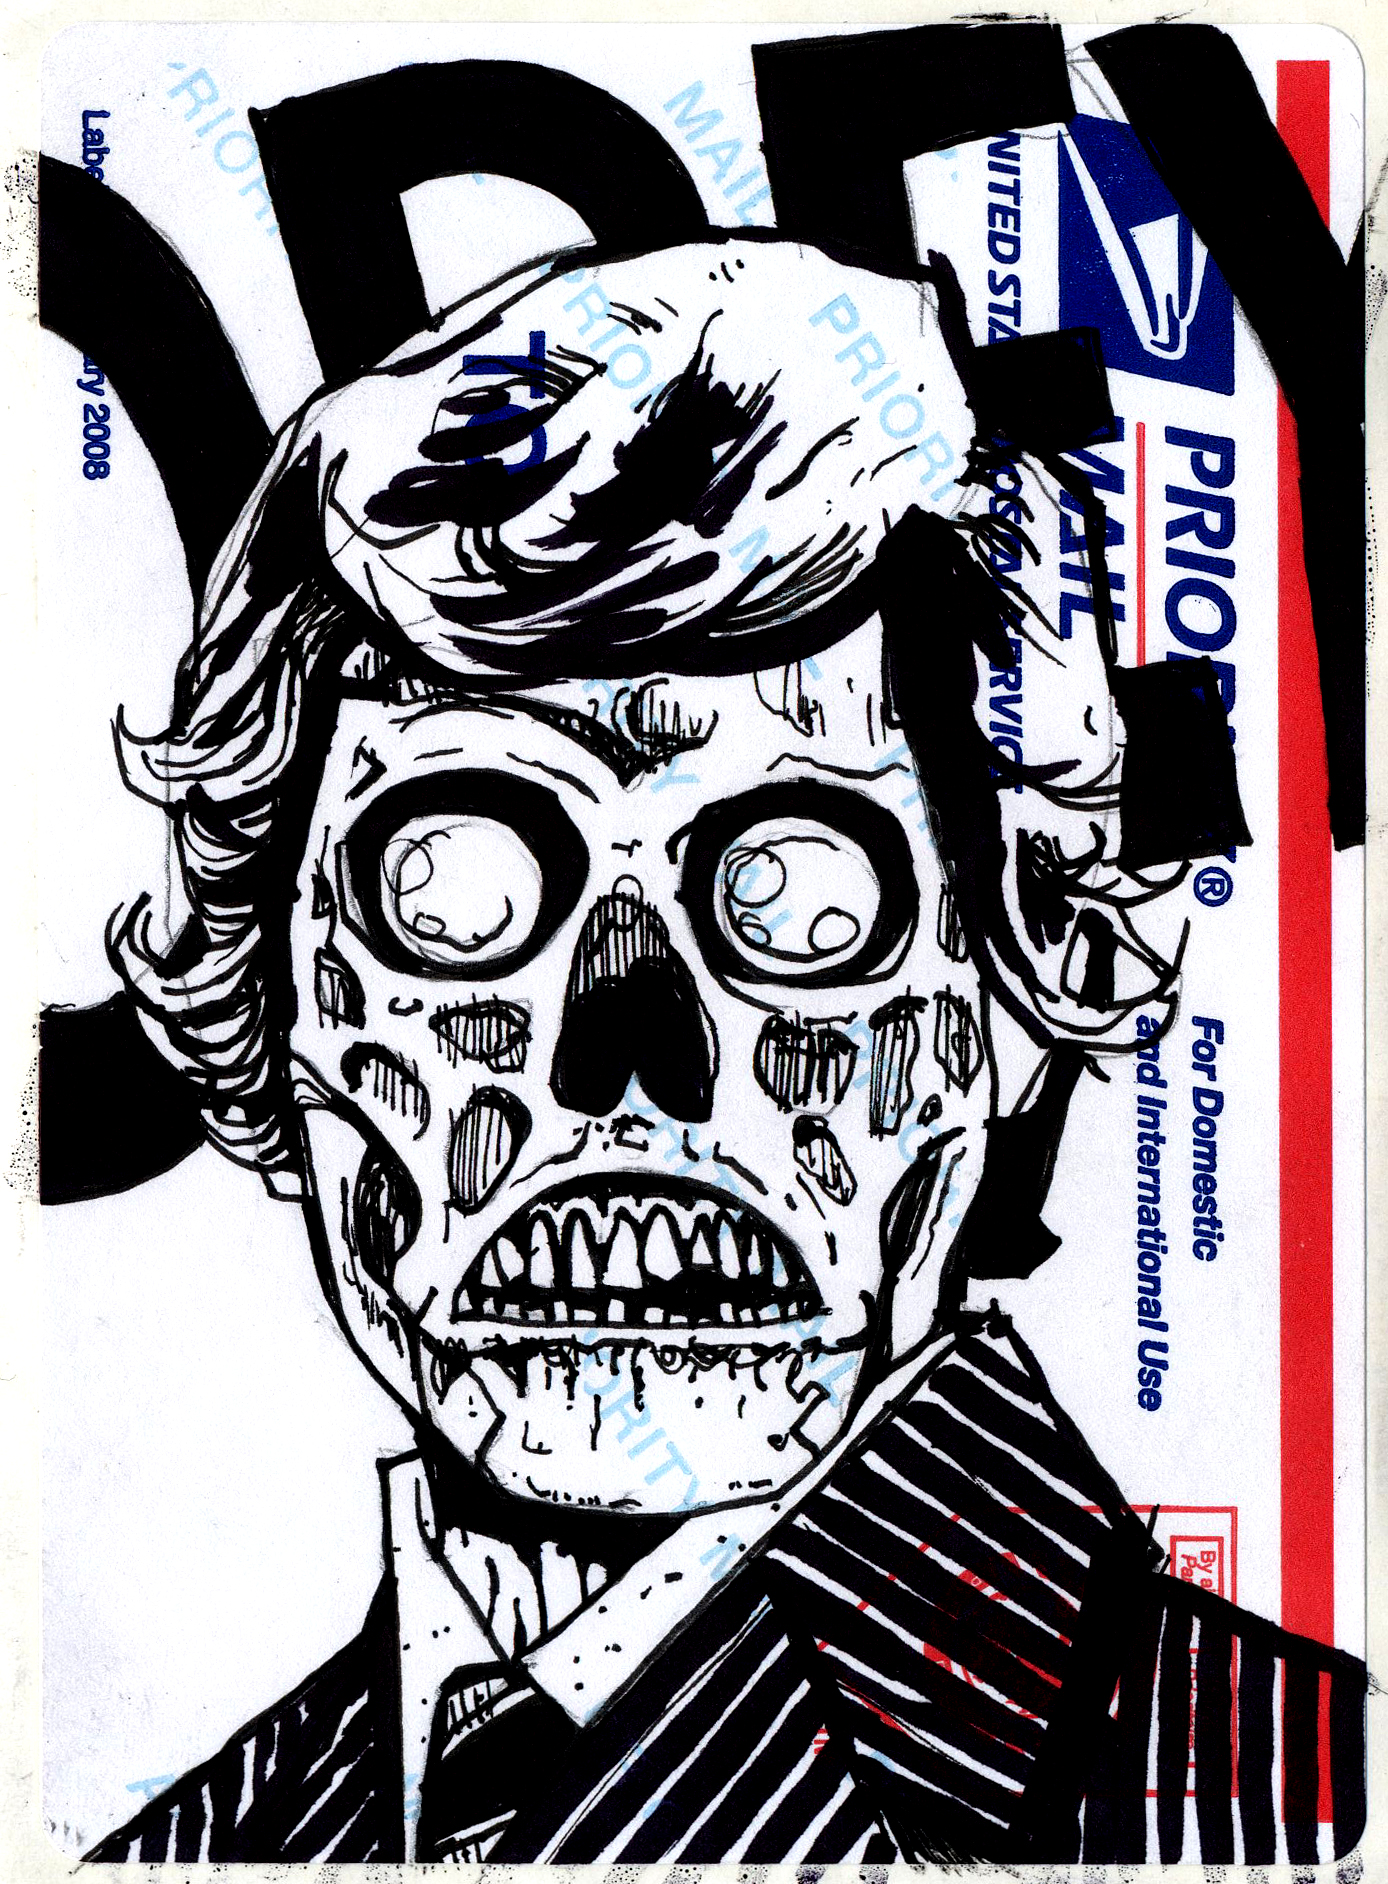 they live wallpaper,illustration,poster,fictional character,font,graphic design